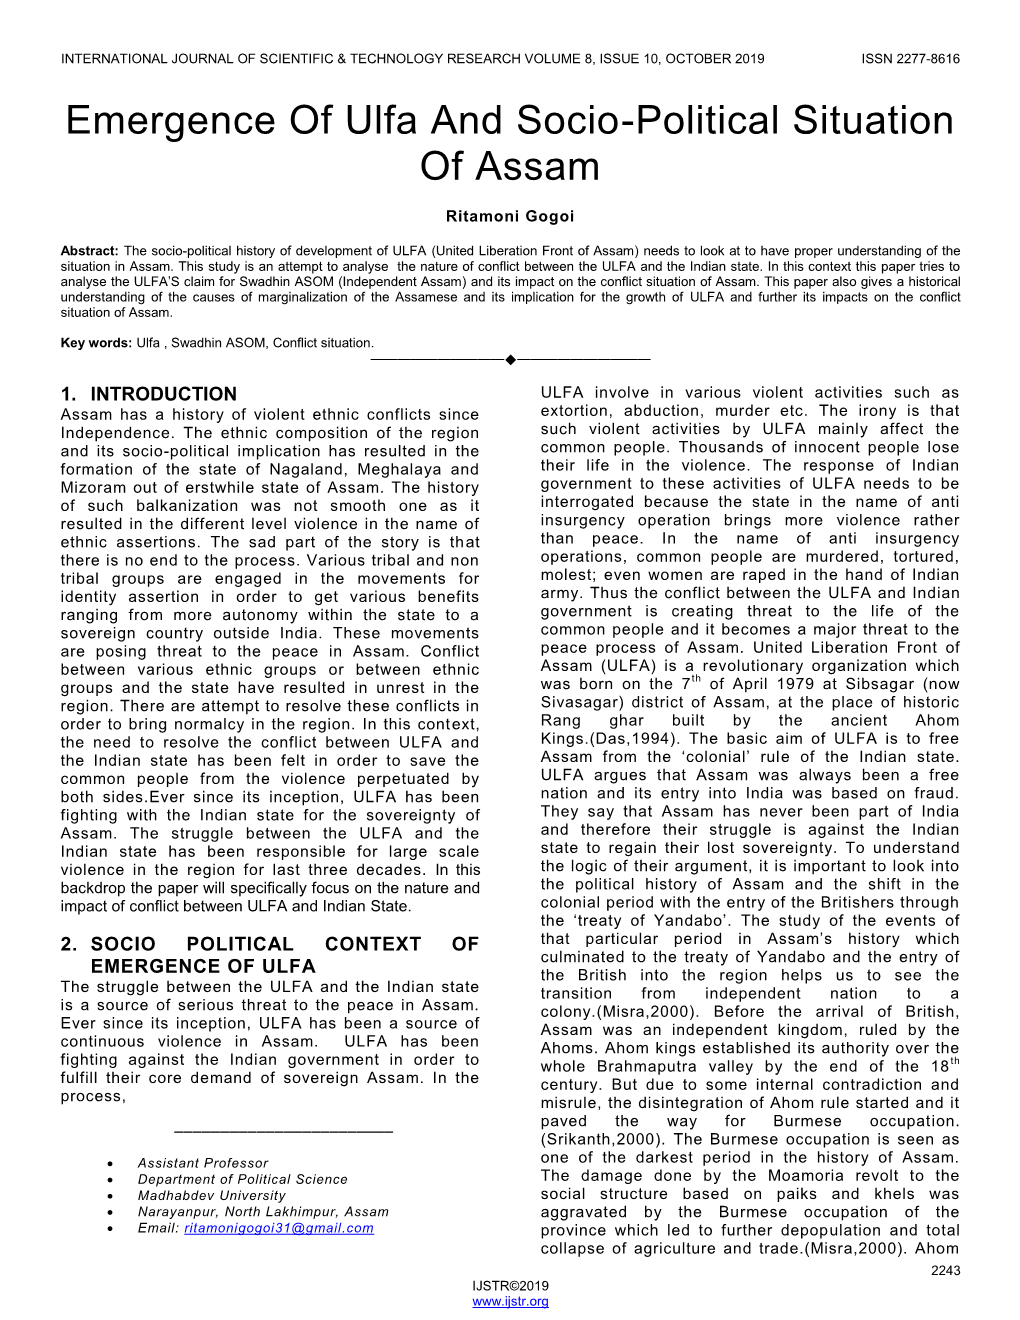 Emergence of Ulfa and Socio-Political Situation of Assam